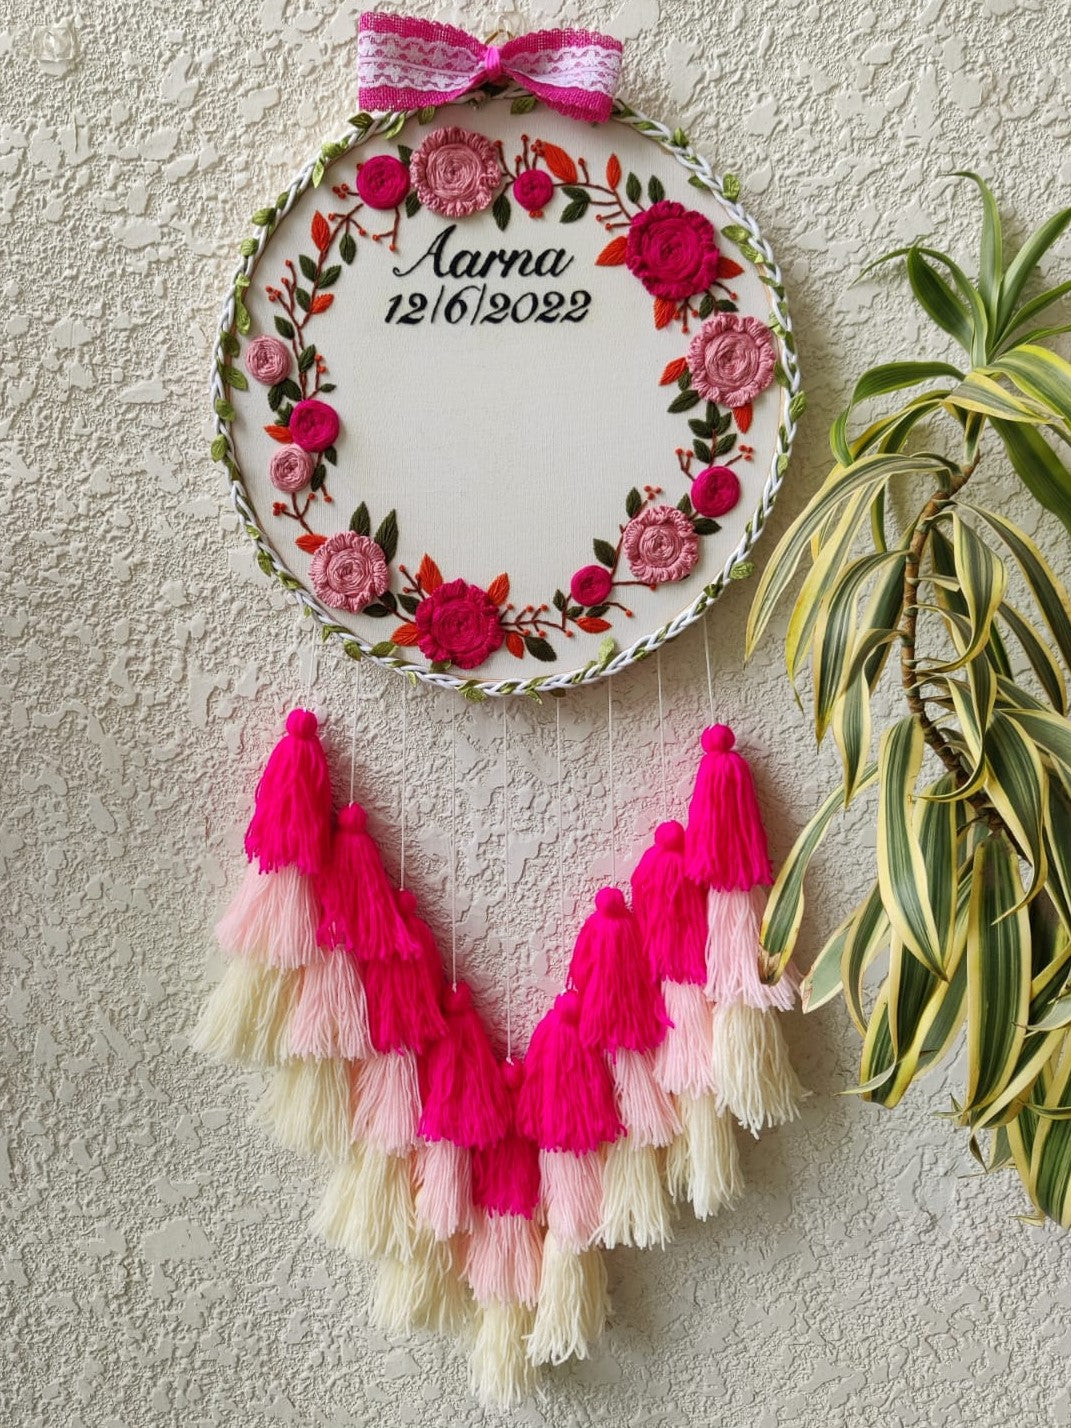 Baby Footprint Customizable Embroidered Hoop with Tassels